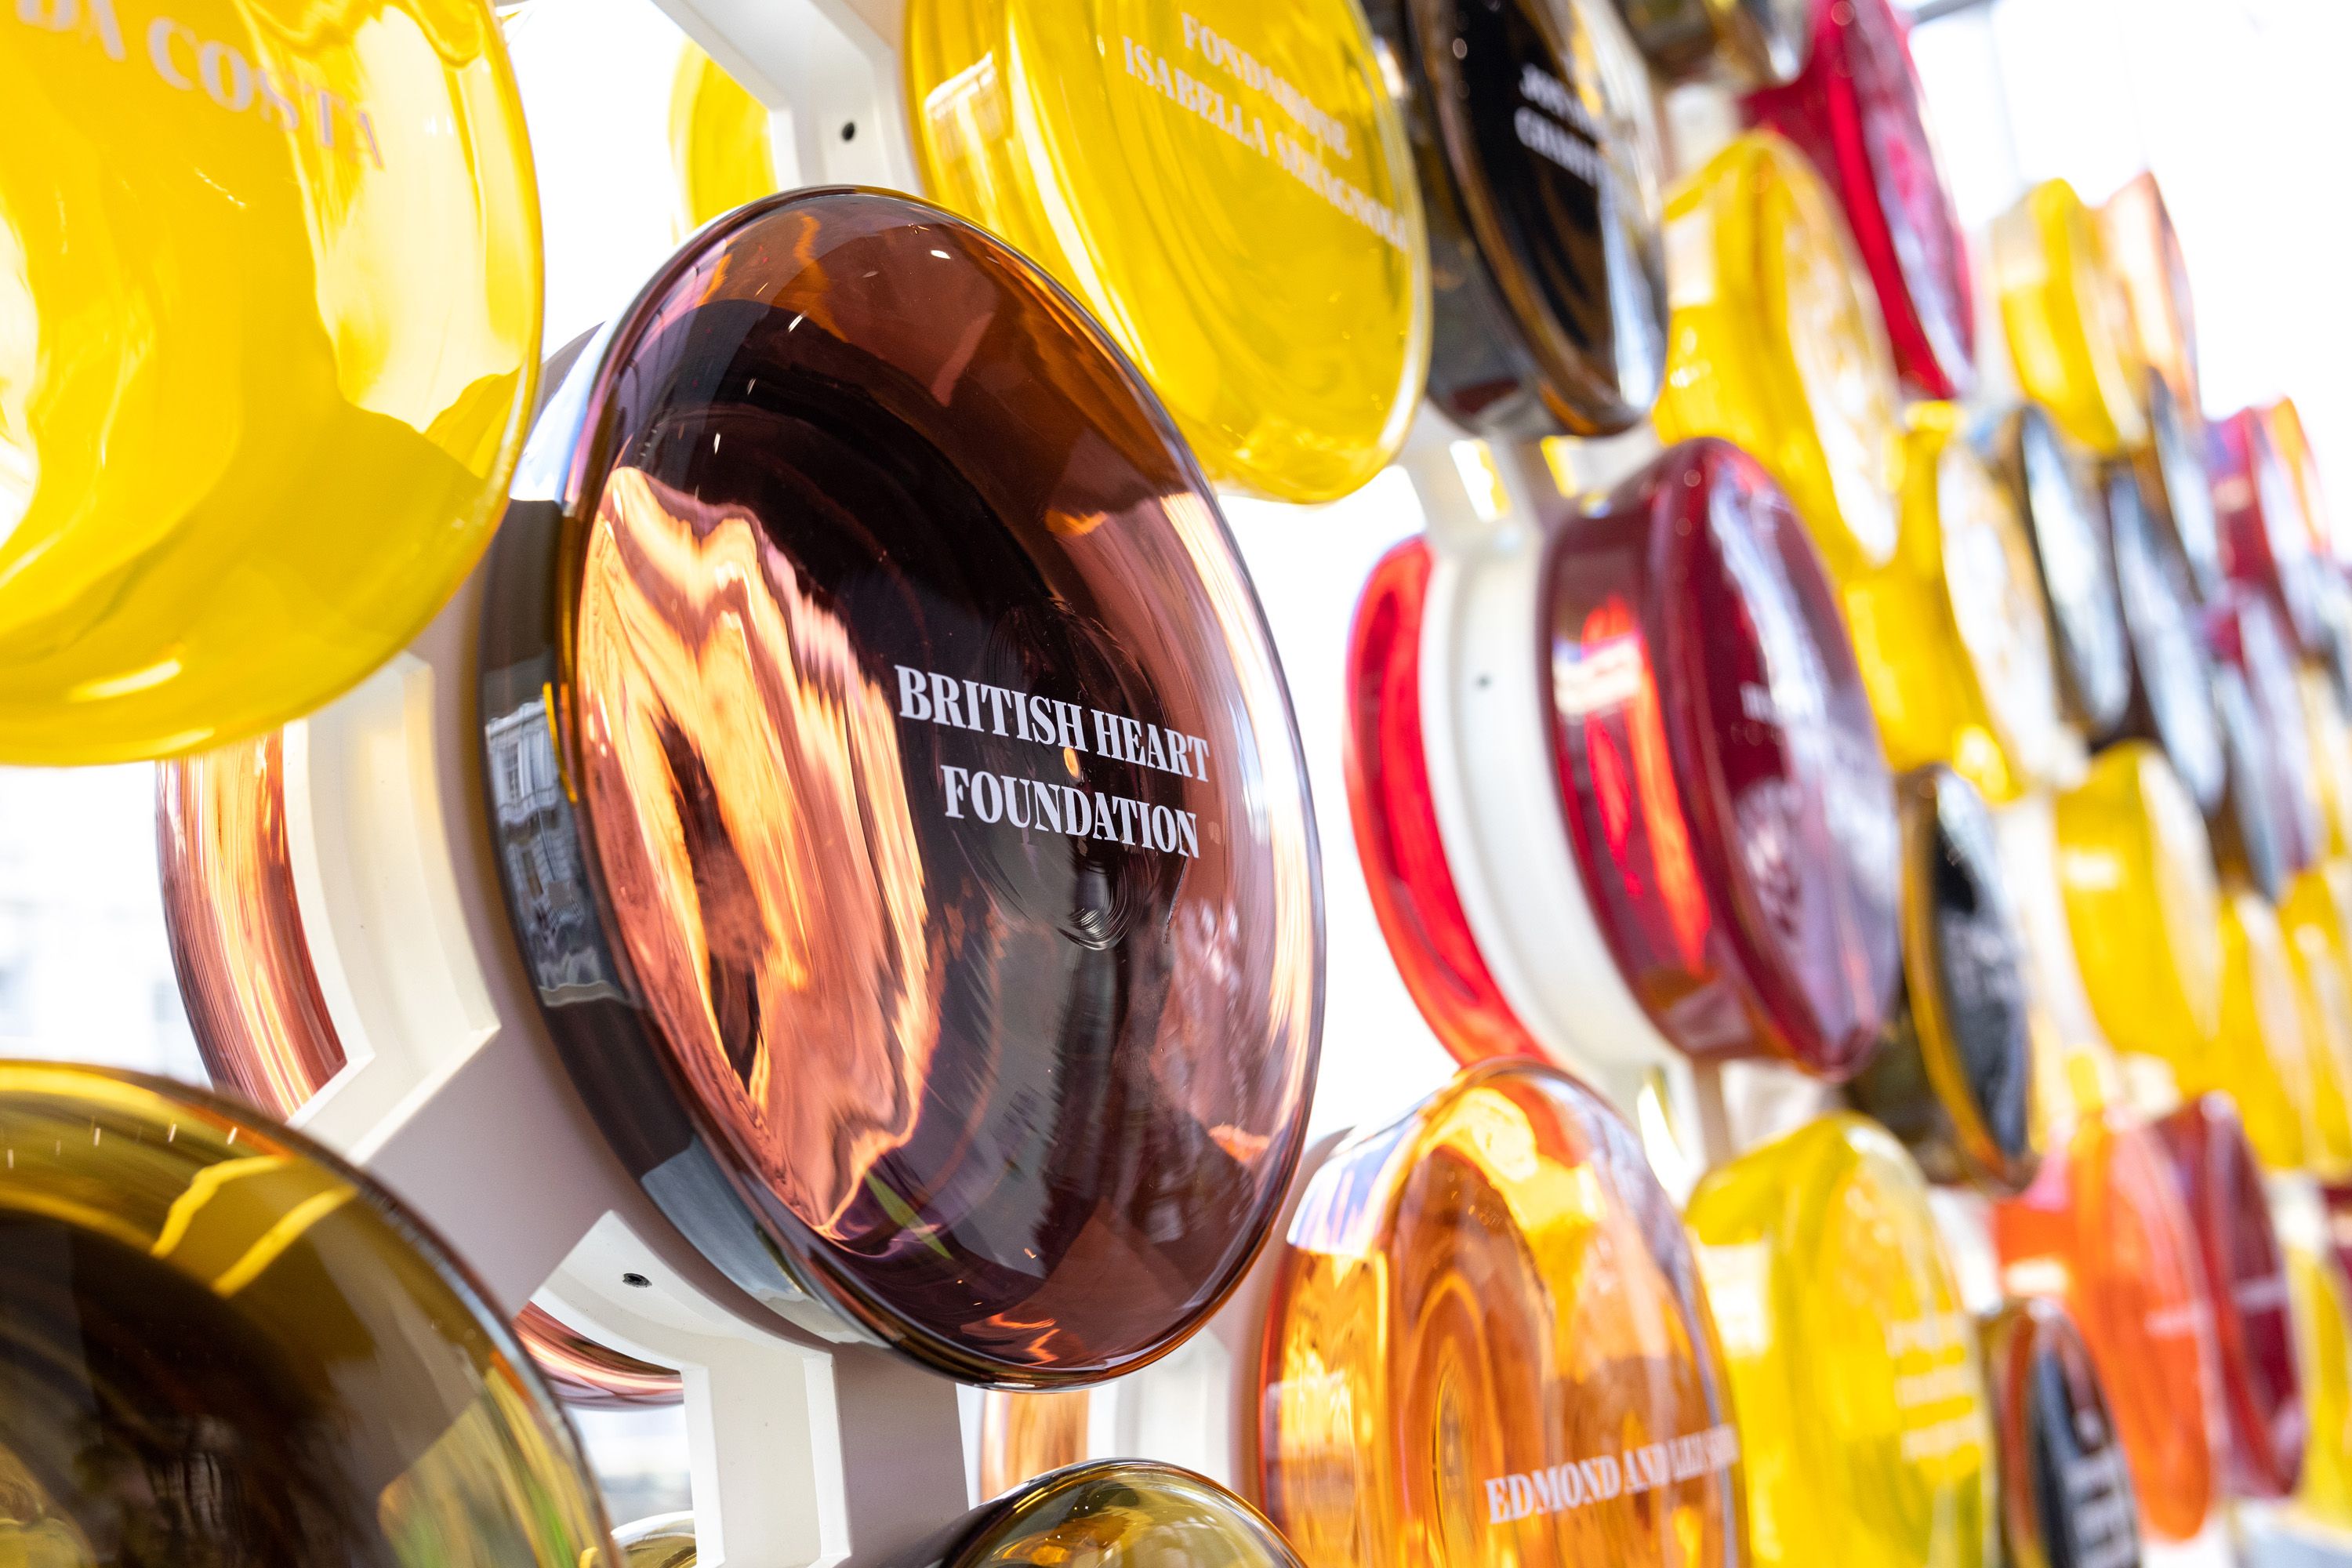 The Circle of Benefactors exhibition in the College's Main Entrance, which consists of circles of coloured glass with the names of donors printed on